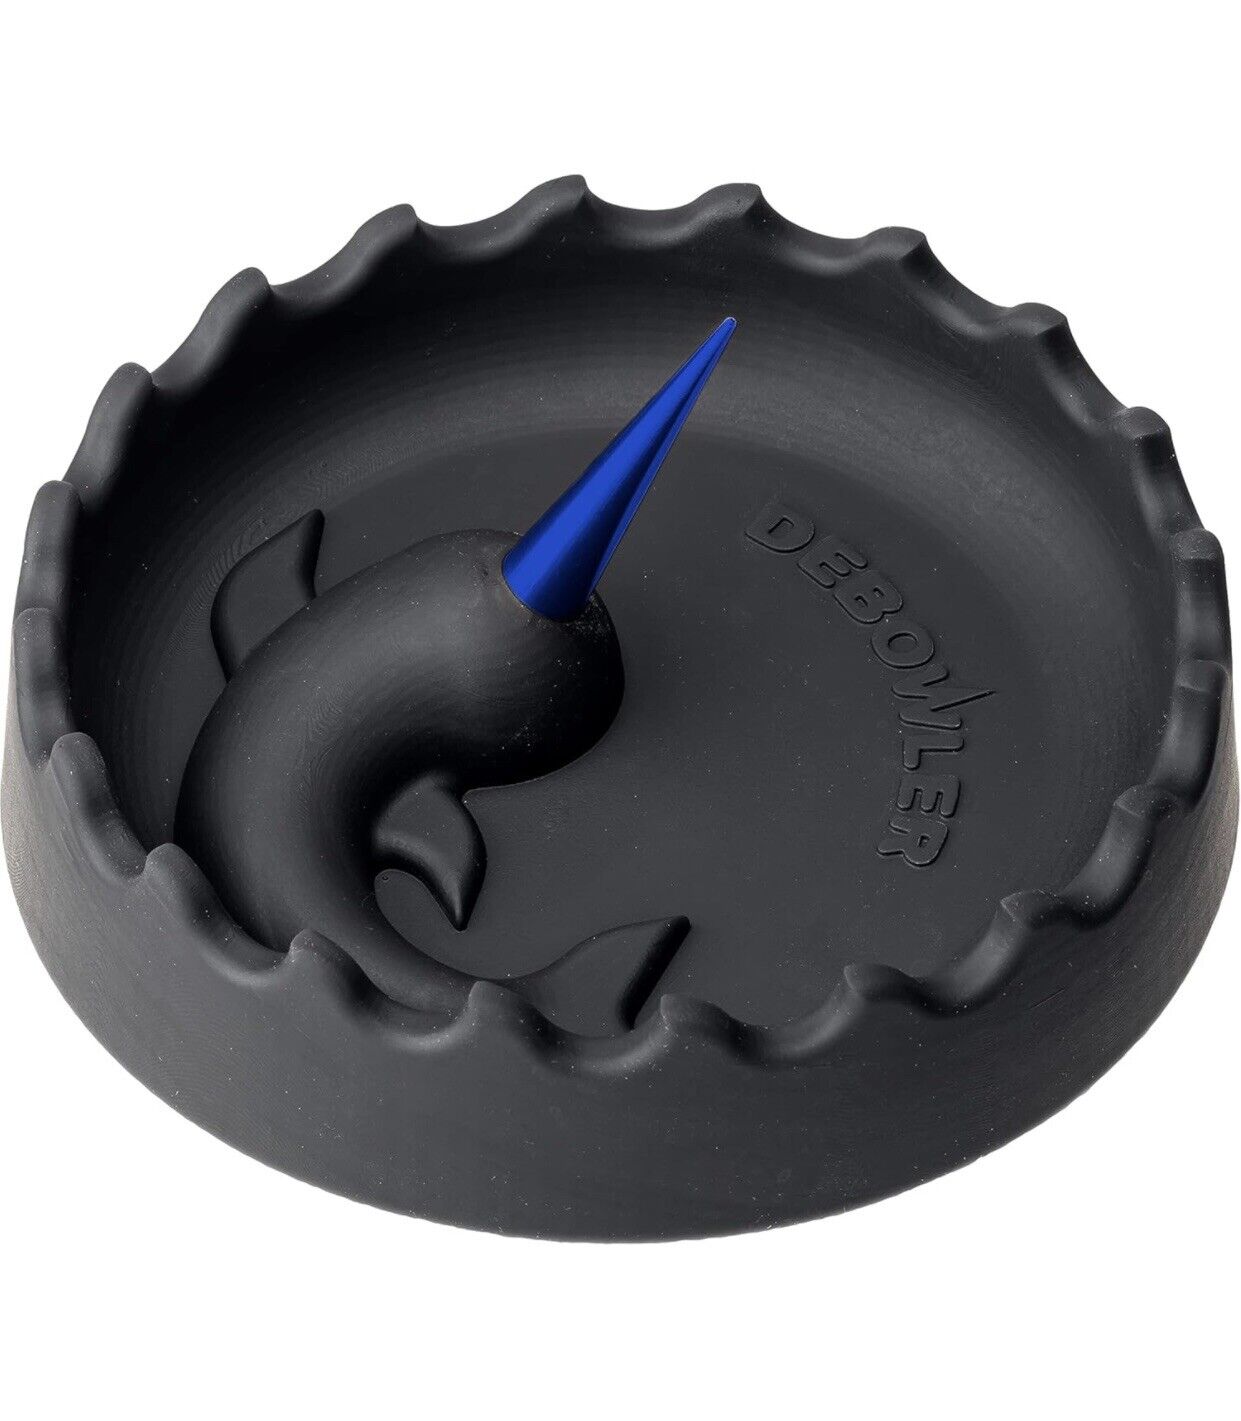 Debowler Narwhal Silicone Ashtray - BLUE